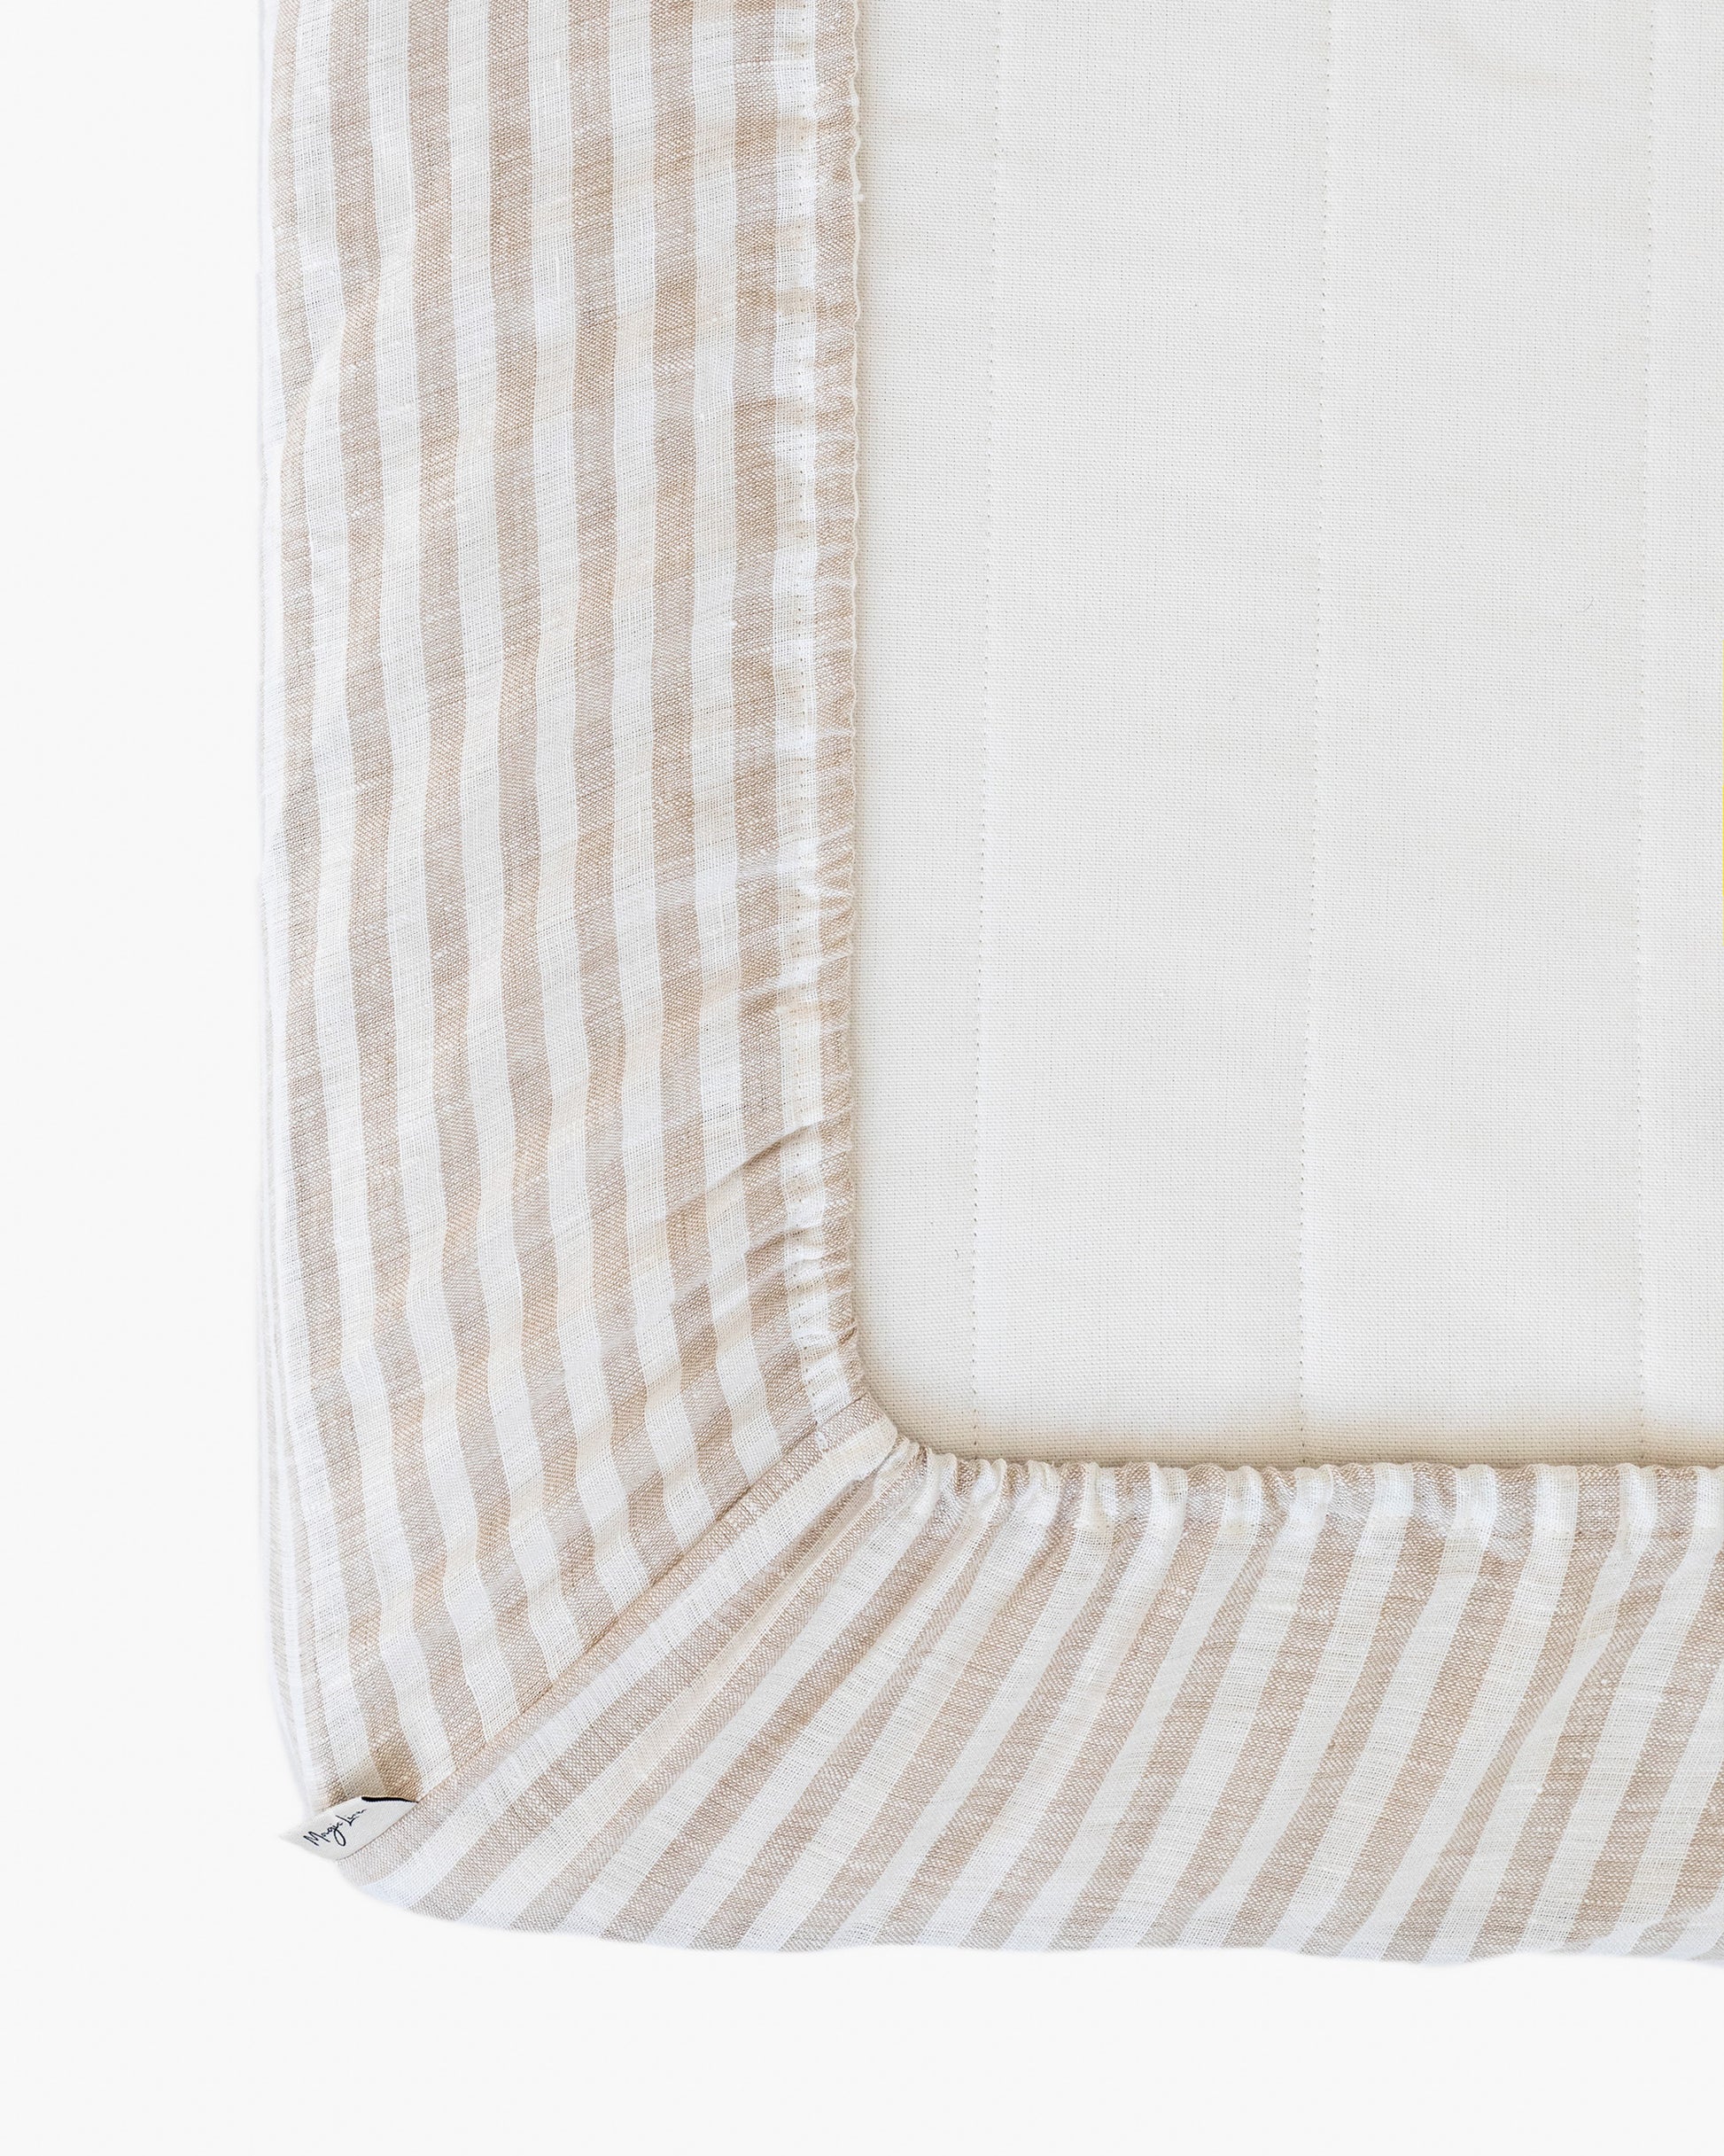 Striped in natural linen fitted sheet - MagicLinen